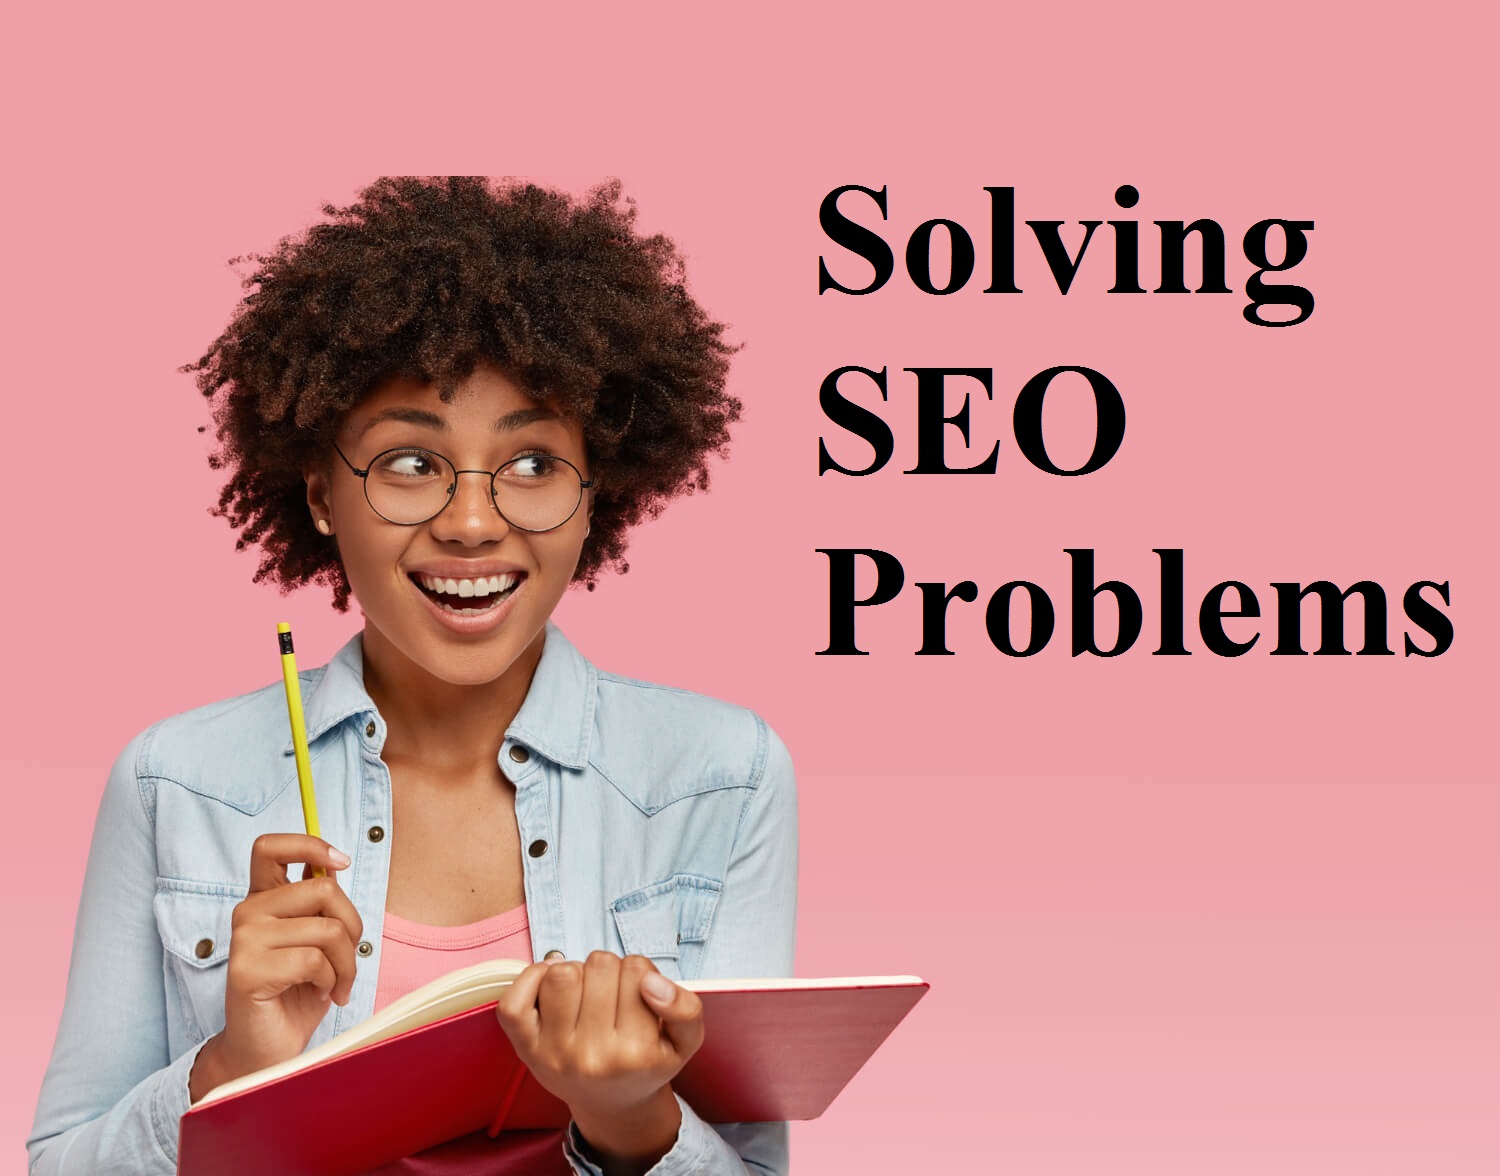 Solving SEO problems with the help of content production